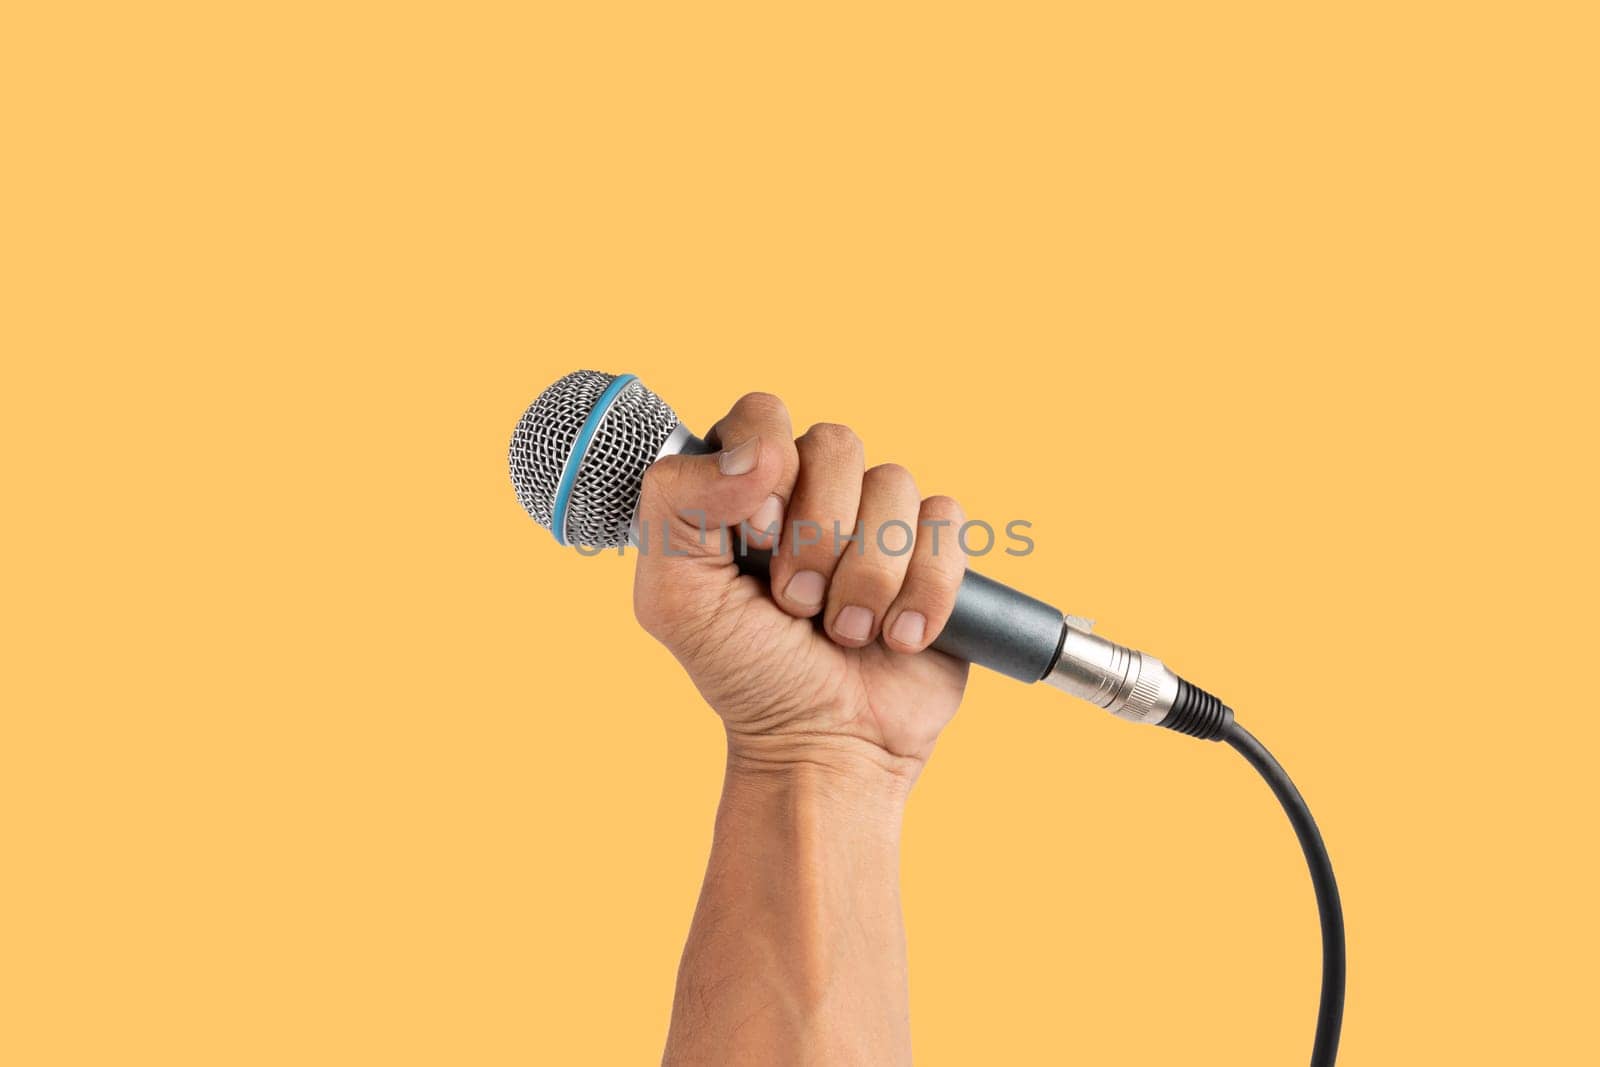 Black male hand holding a microphone isolated on yellow background by TropicalNinjaStudio